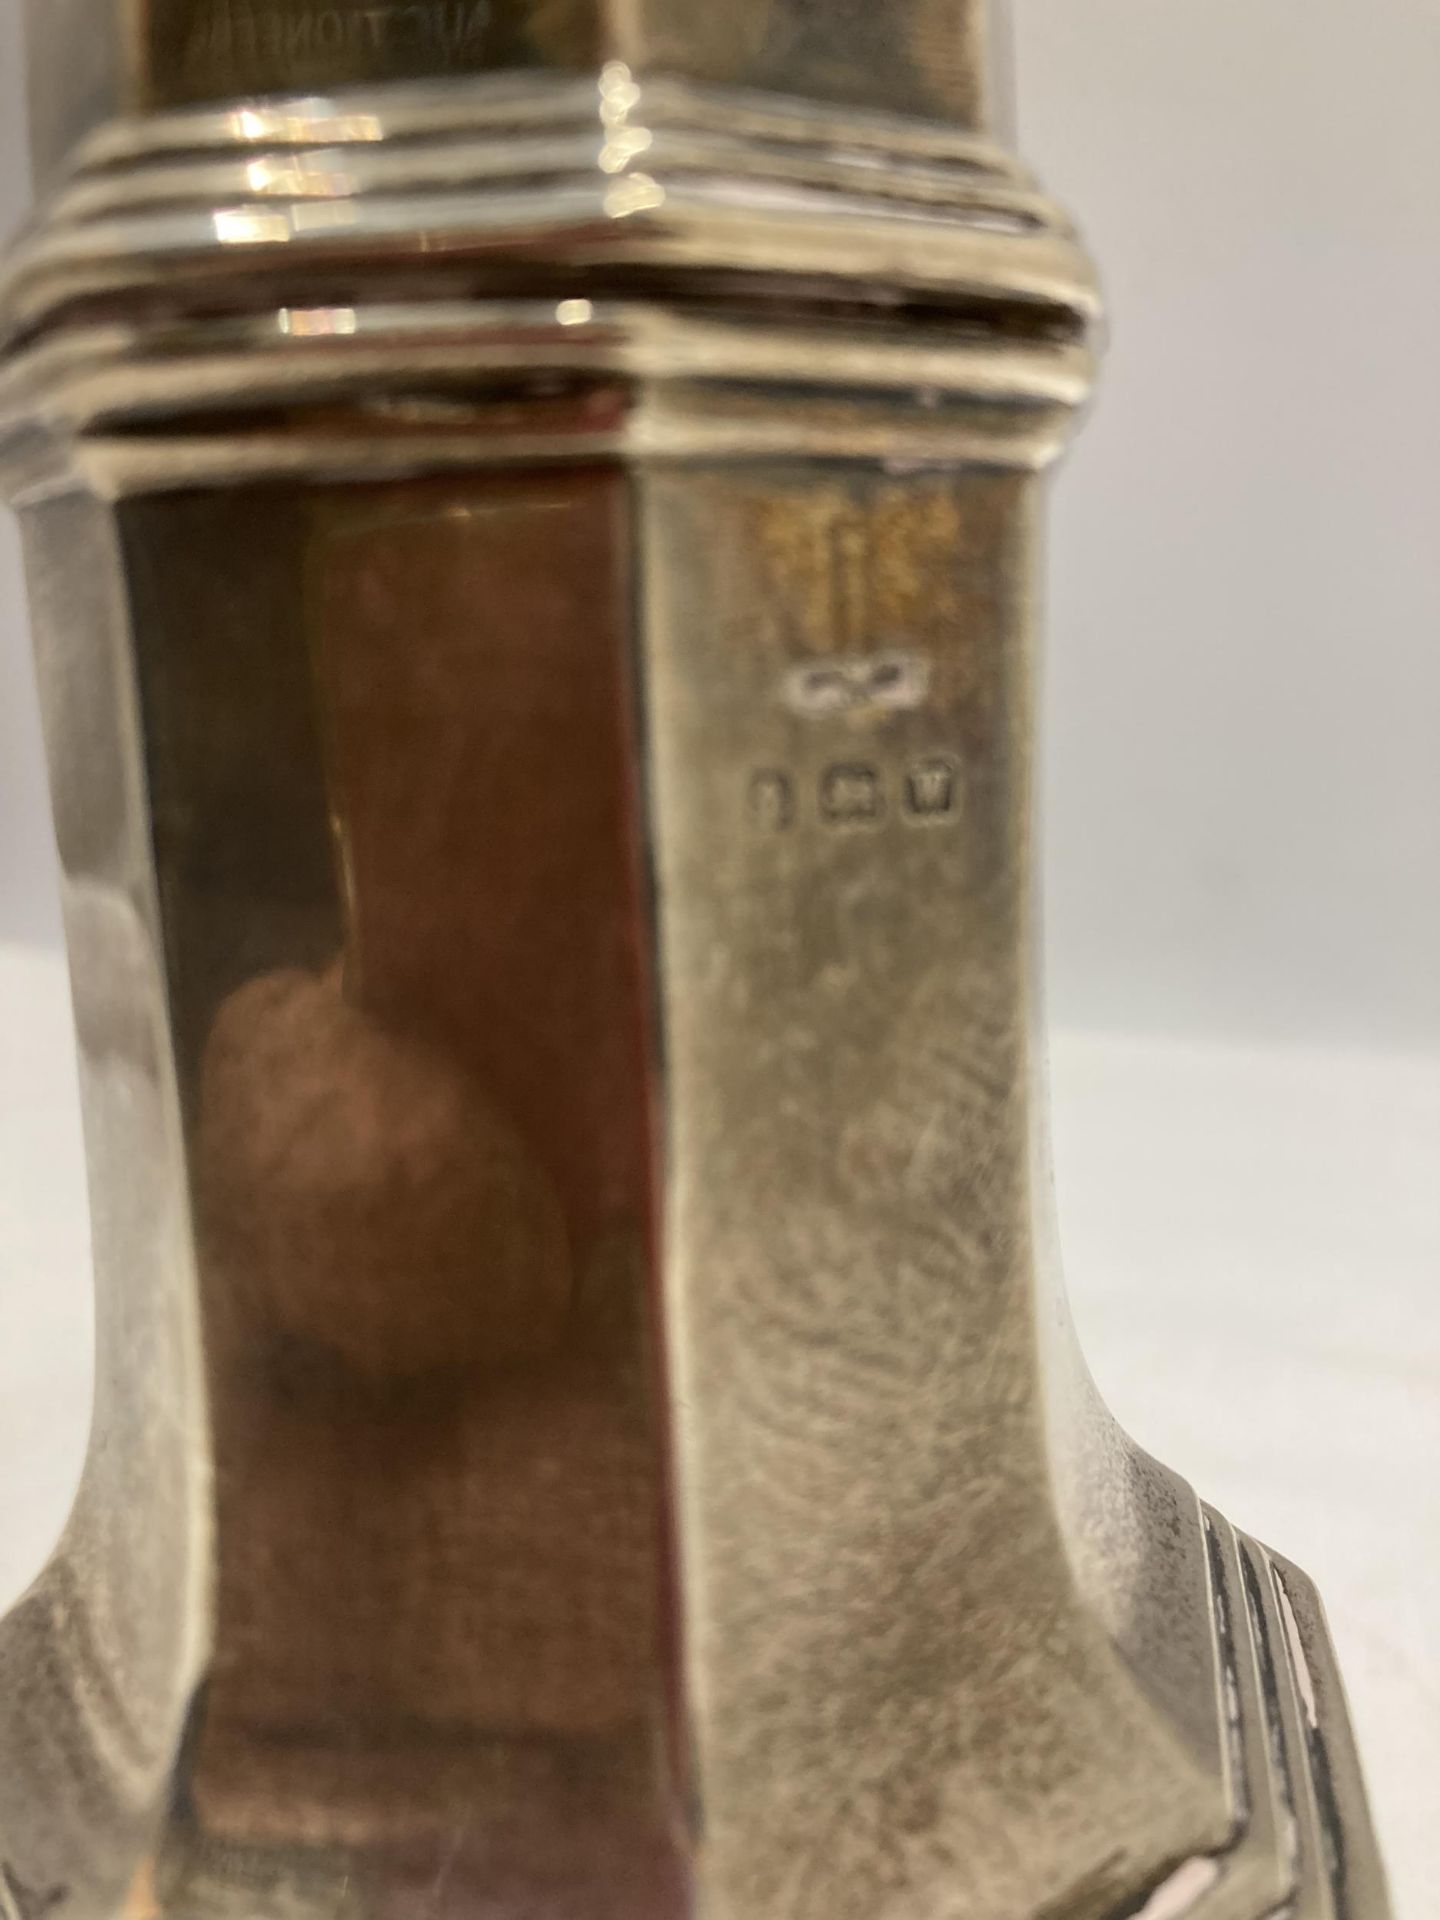 A HALLMARKED BIRMINGHAM SILVER SIFTER GROSS WEIGHT 229 GRAMS - Image 4 of 5